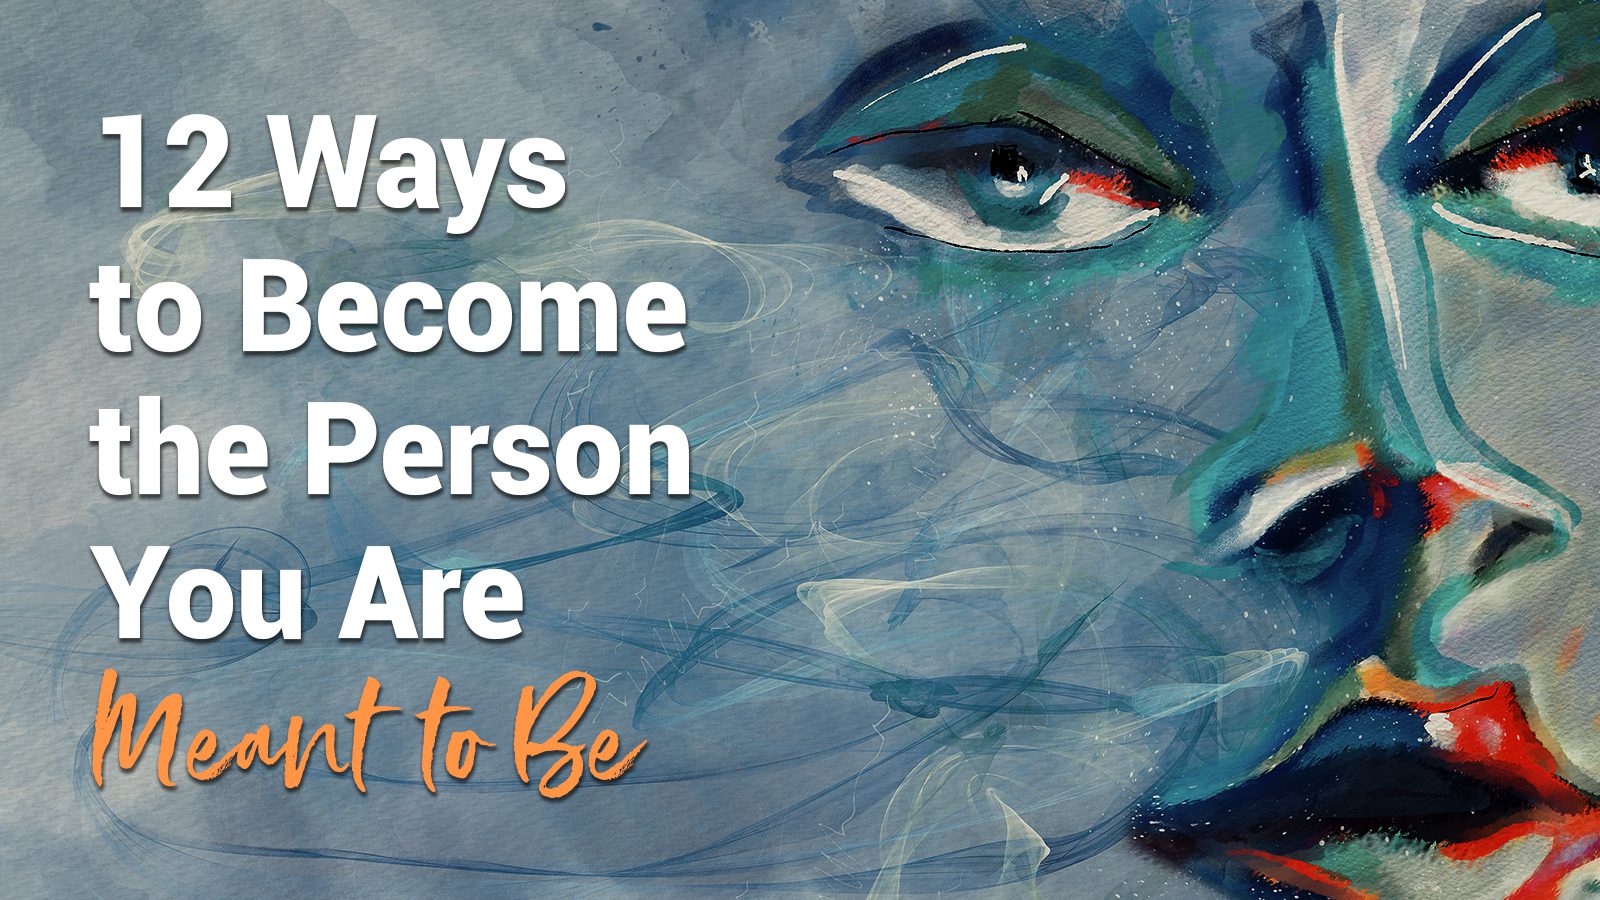 12 Ways to Become the Person You Are Meant to Be